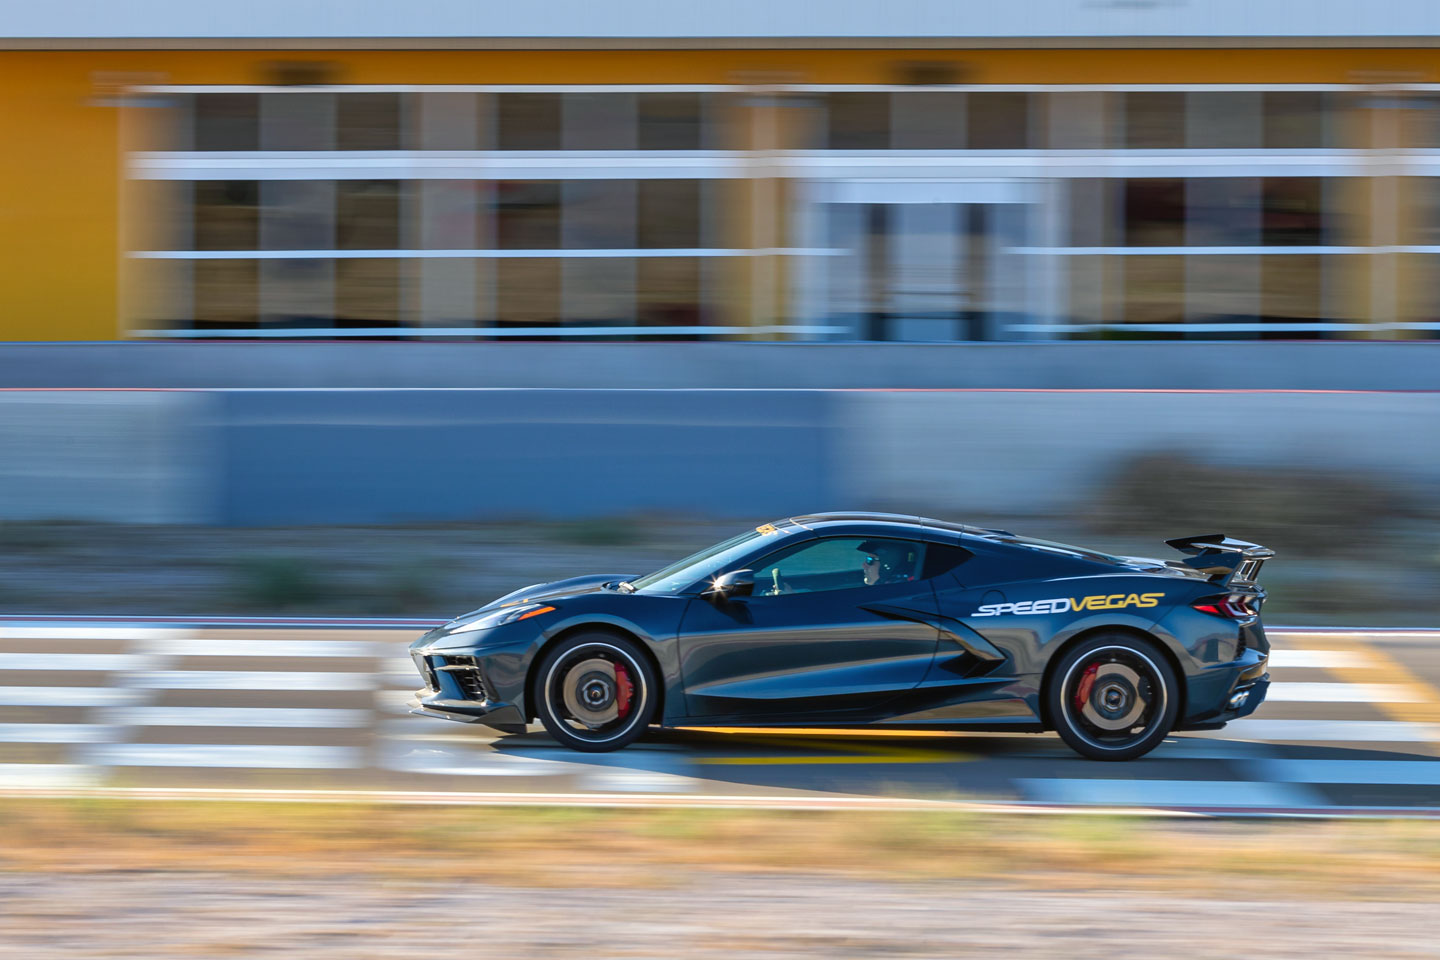 XPEL Helps Protect Supercars in Las Vegas - Speed Vegas - Chevy C8 Corvette